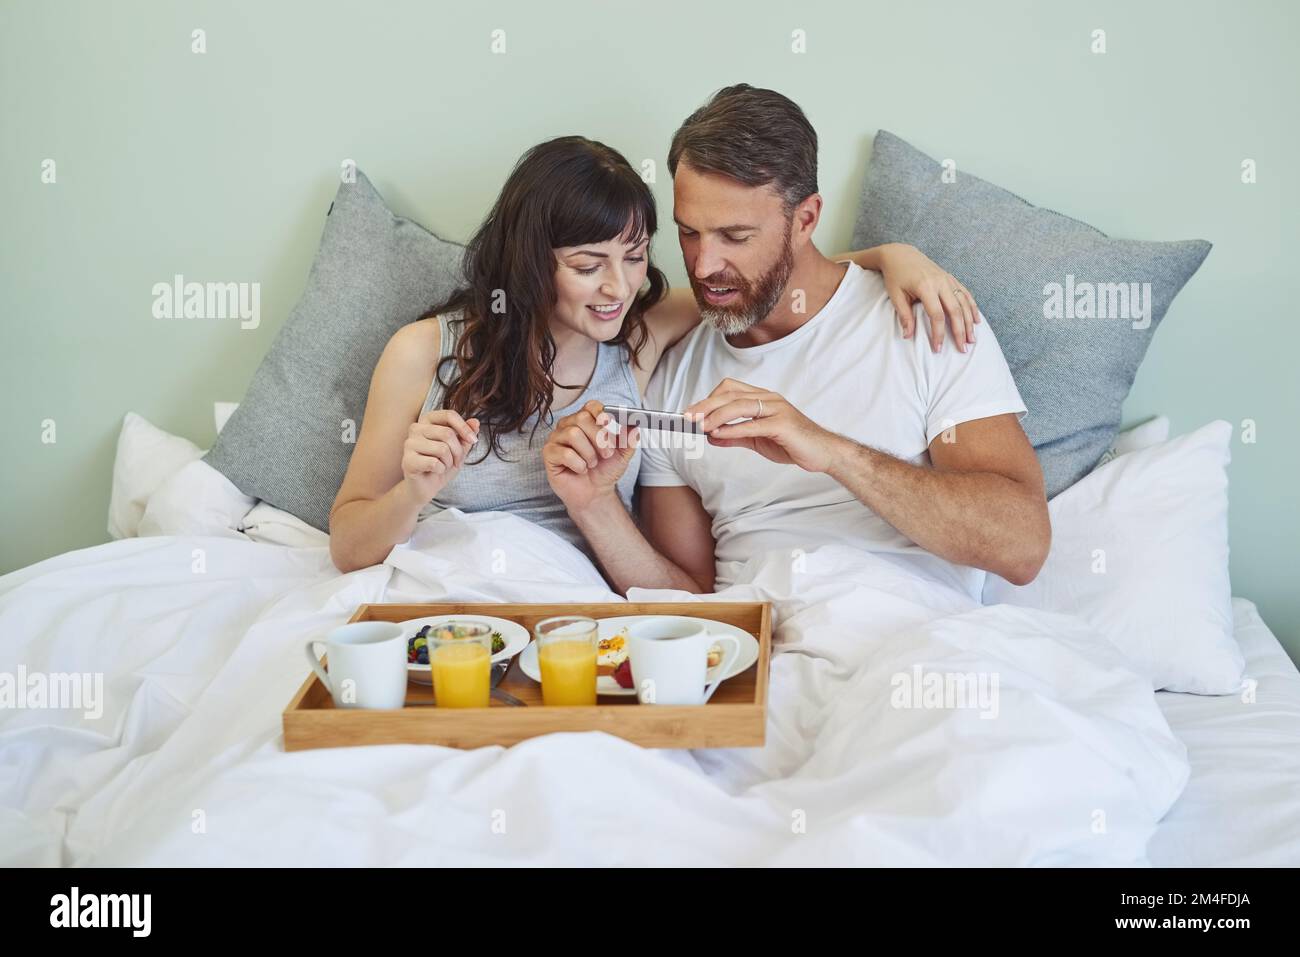 Lets make people jealous with a photo of our food. a cheerful young couple sitting in bed while enjoying breakfast together and taking a picture Stock Photo